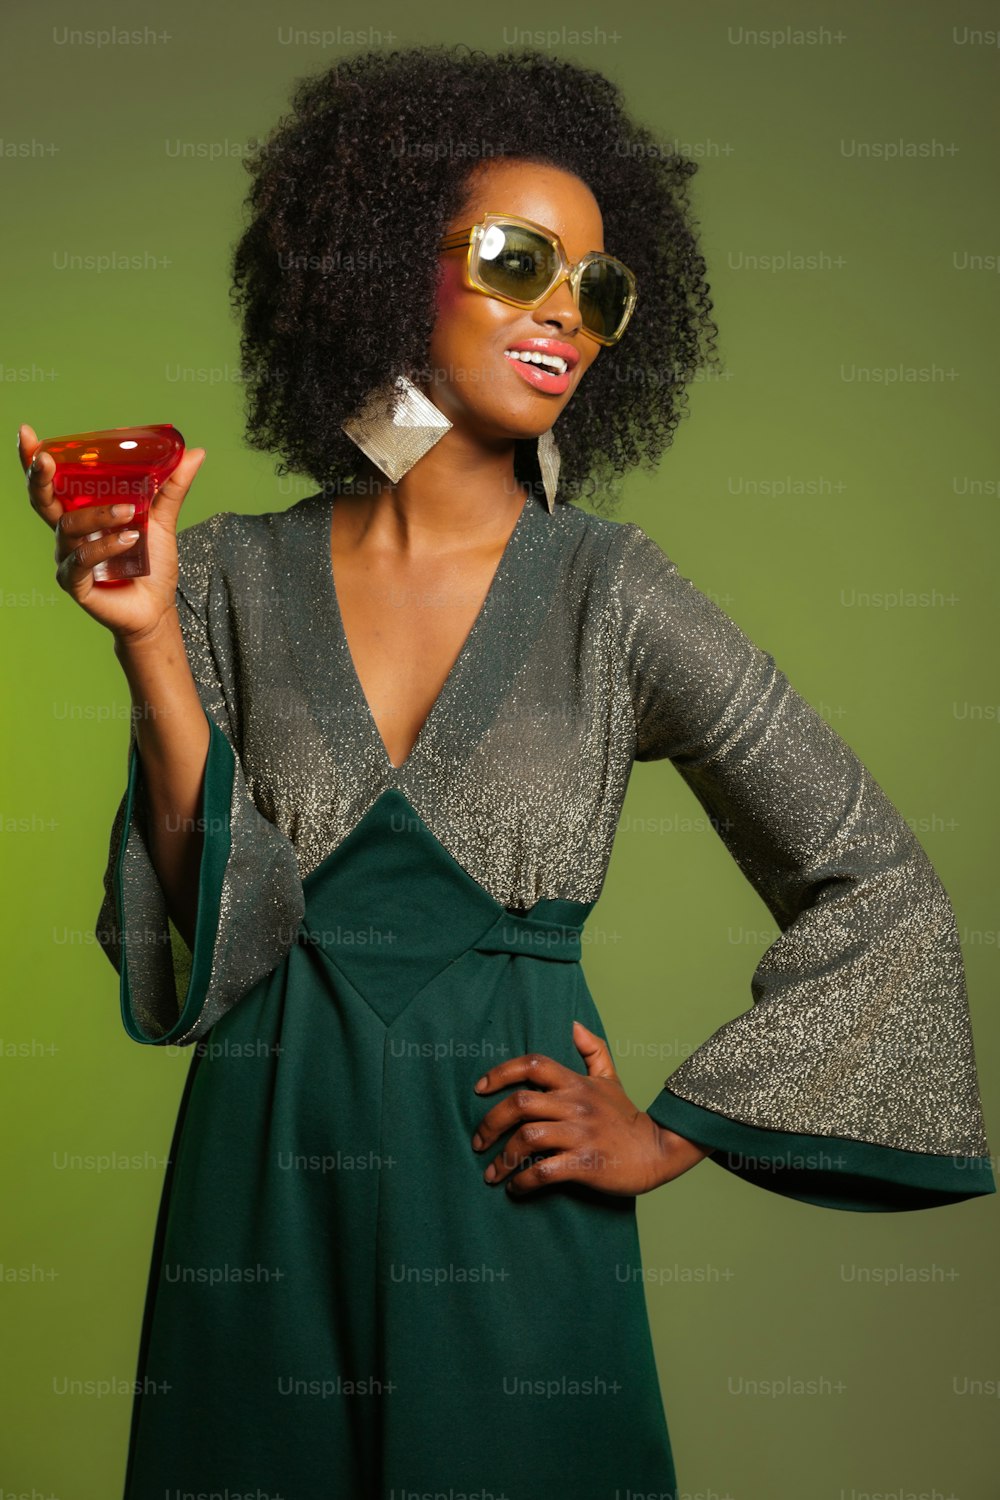 Retro 70s afro fashion woman with green dress and orange cocktail glass. Green wall.